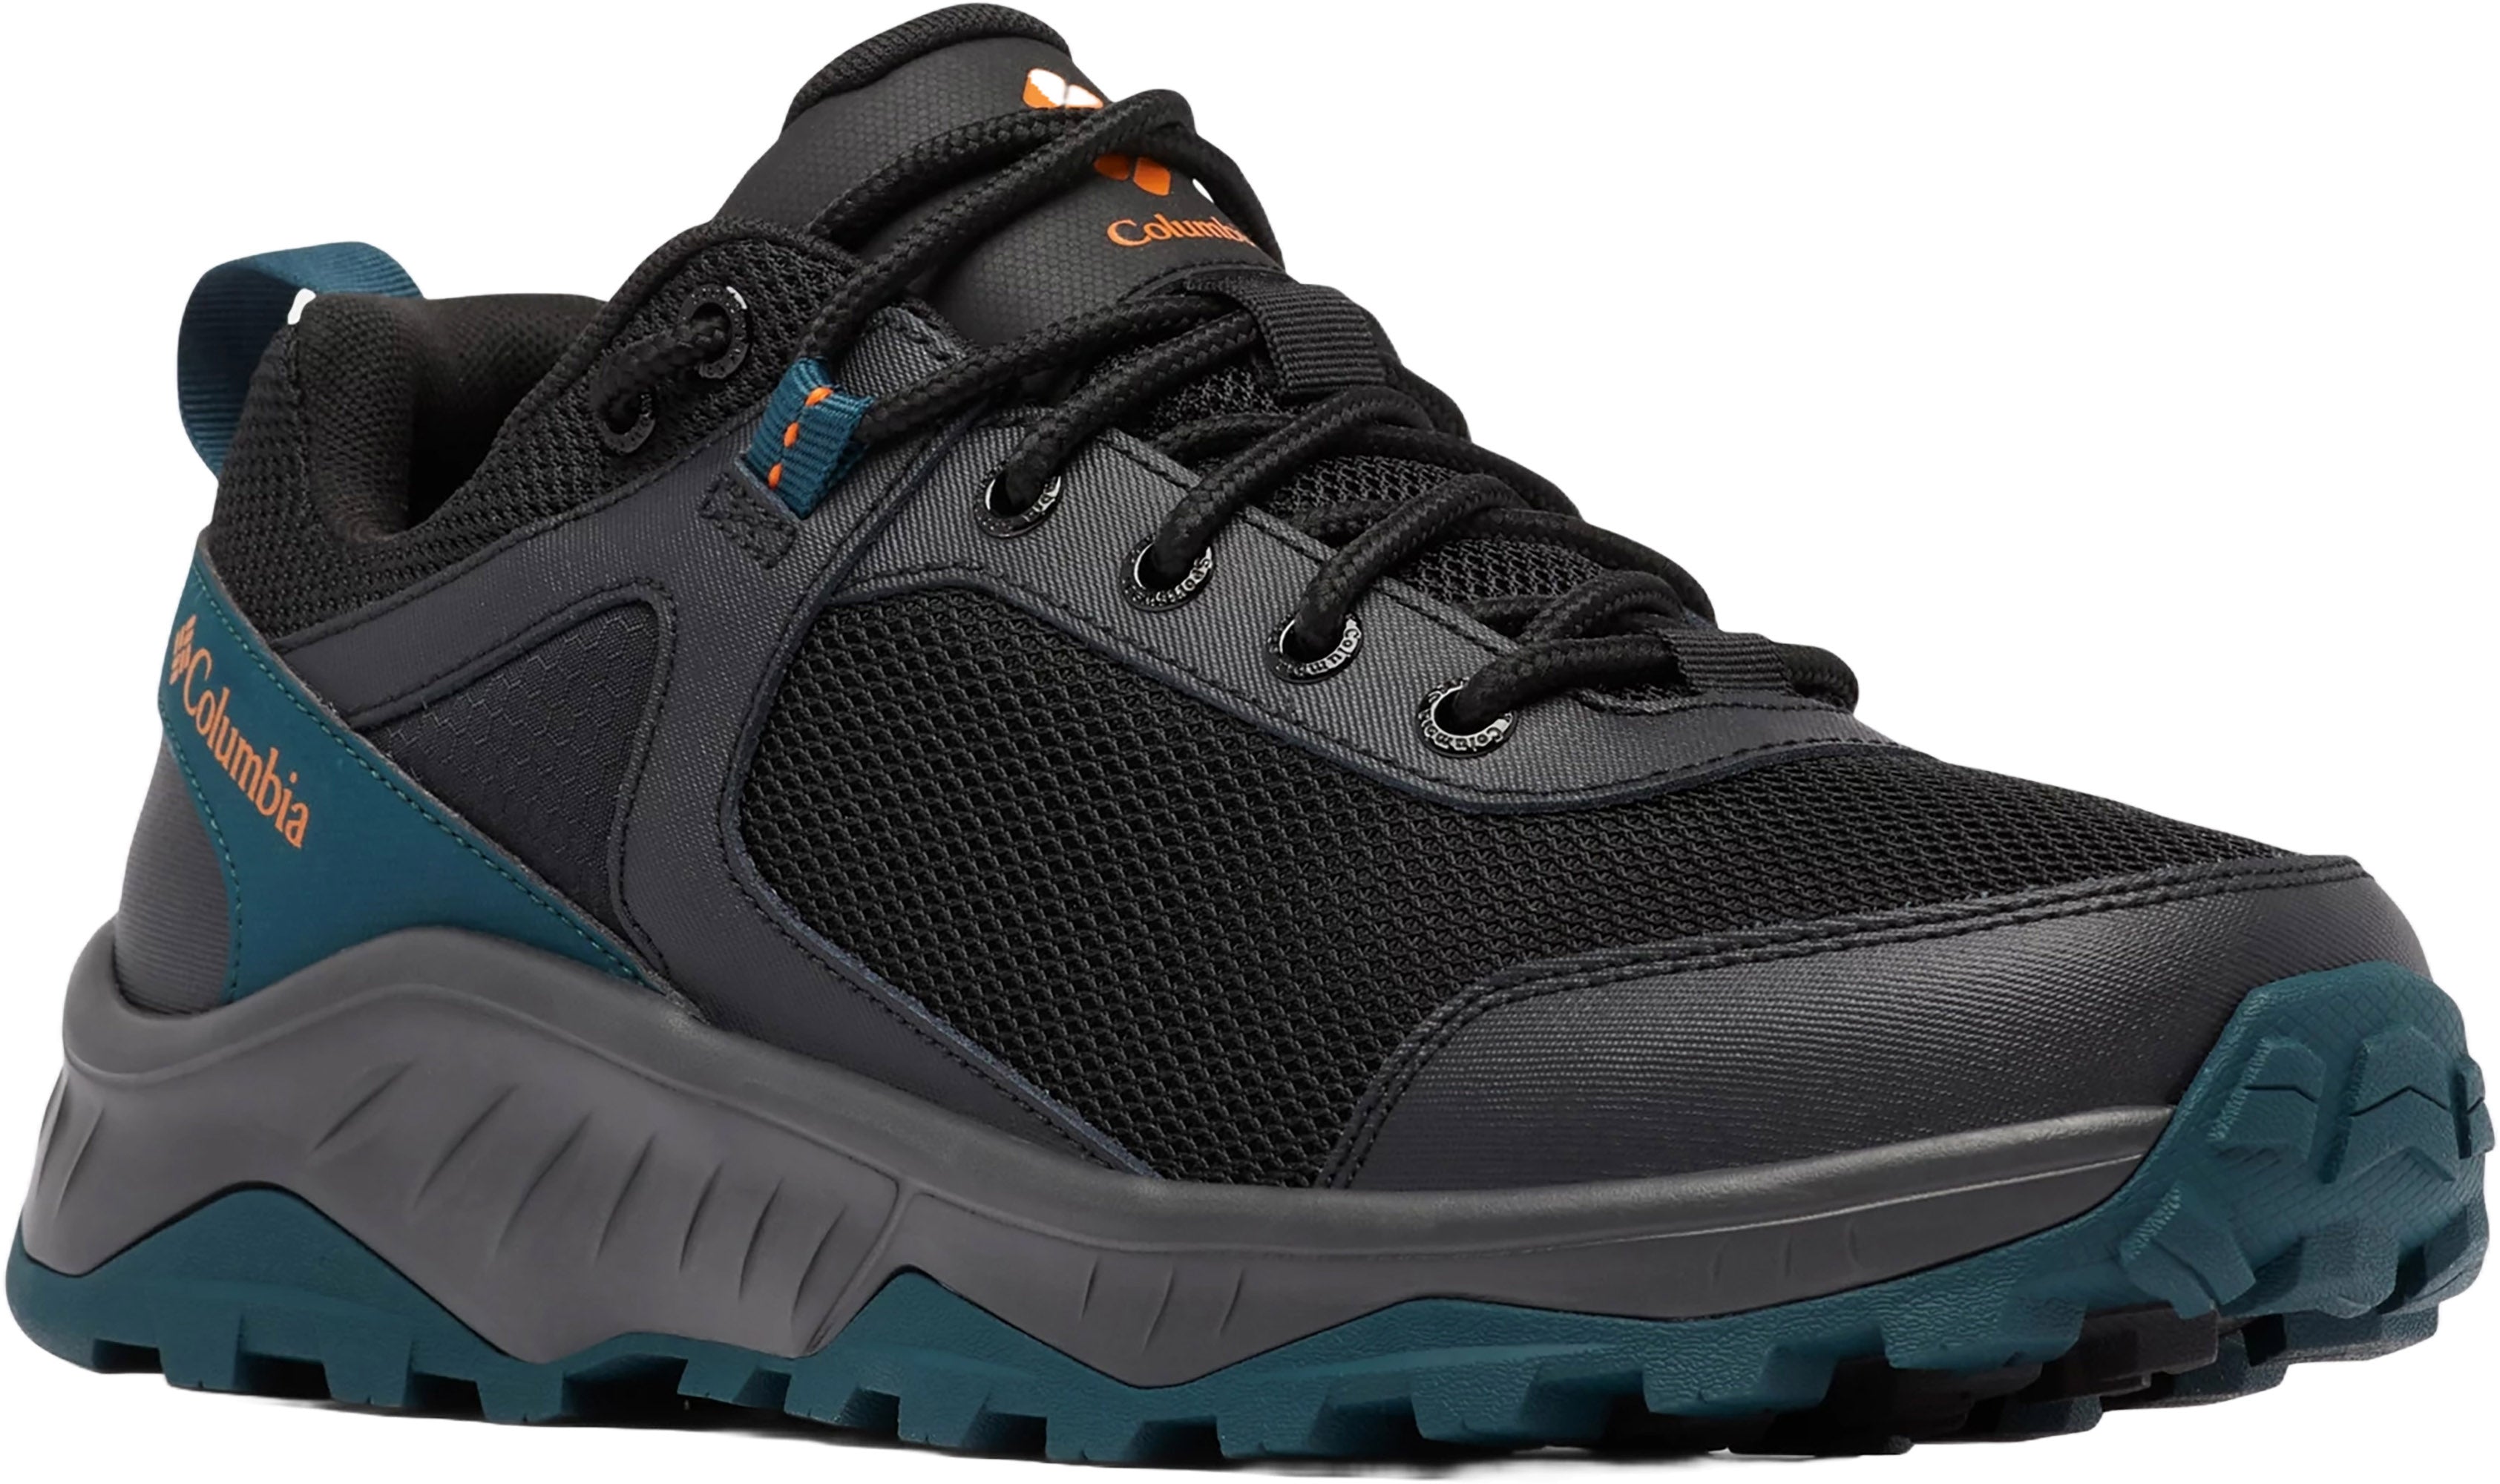 Men's Max Water Shoes - All in Motion™ Black 9